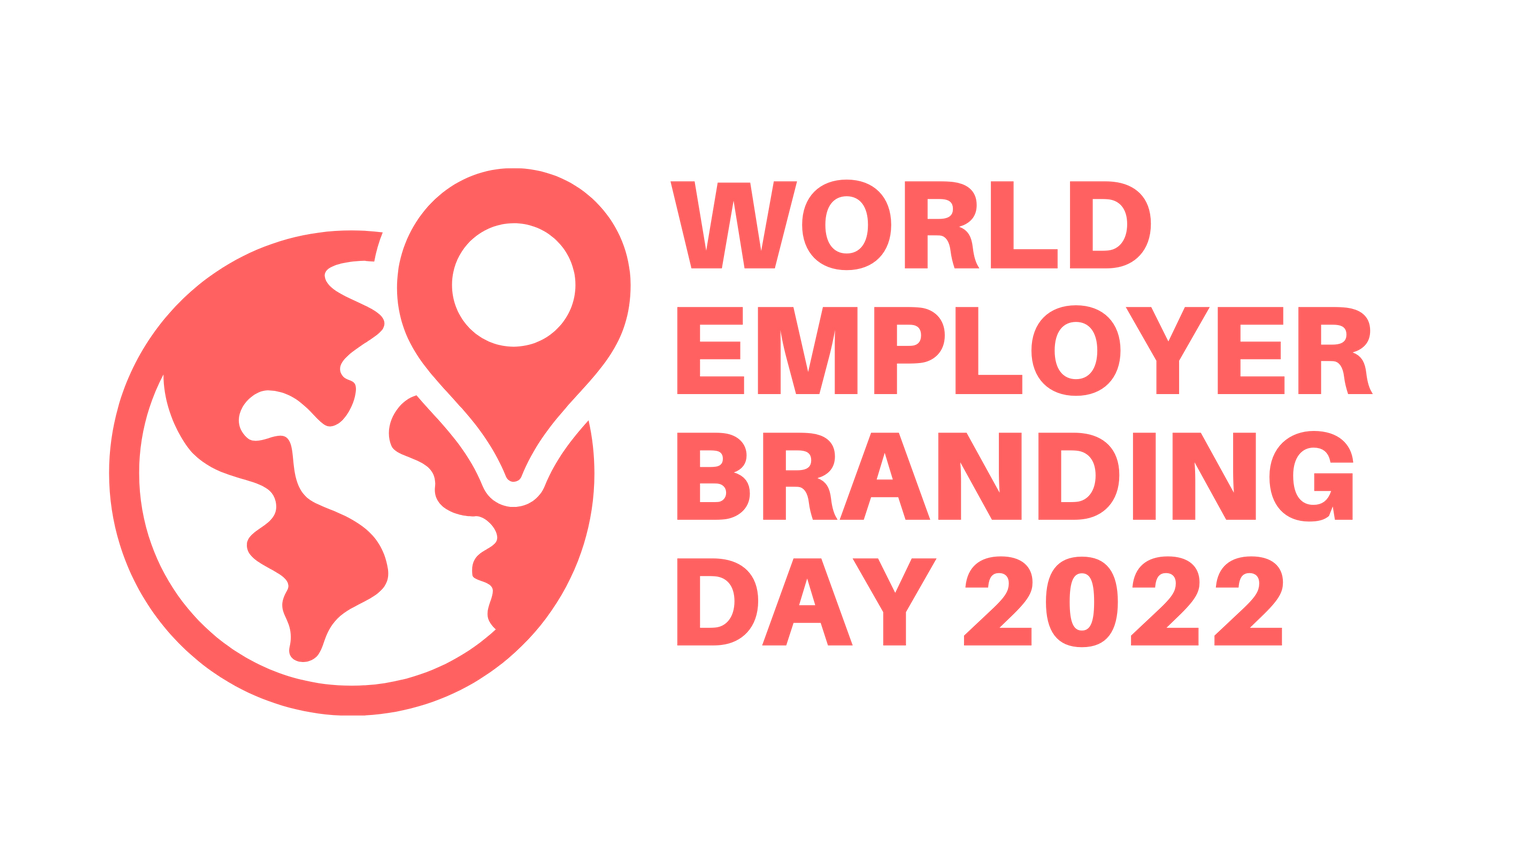 RELIVE The World Employer Branding Day Experience